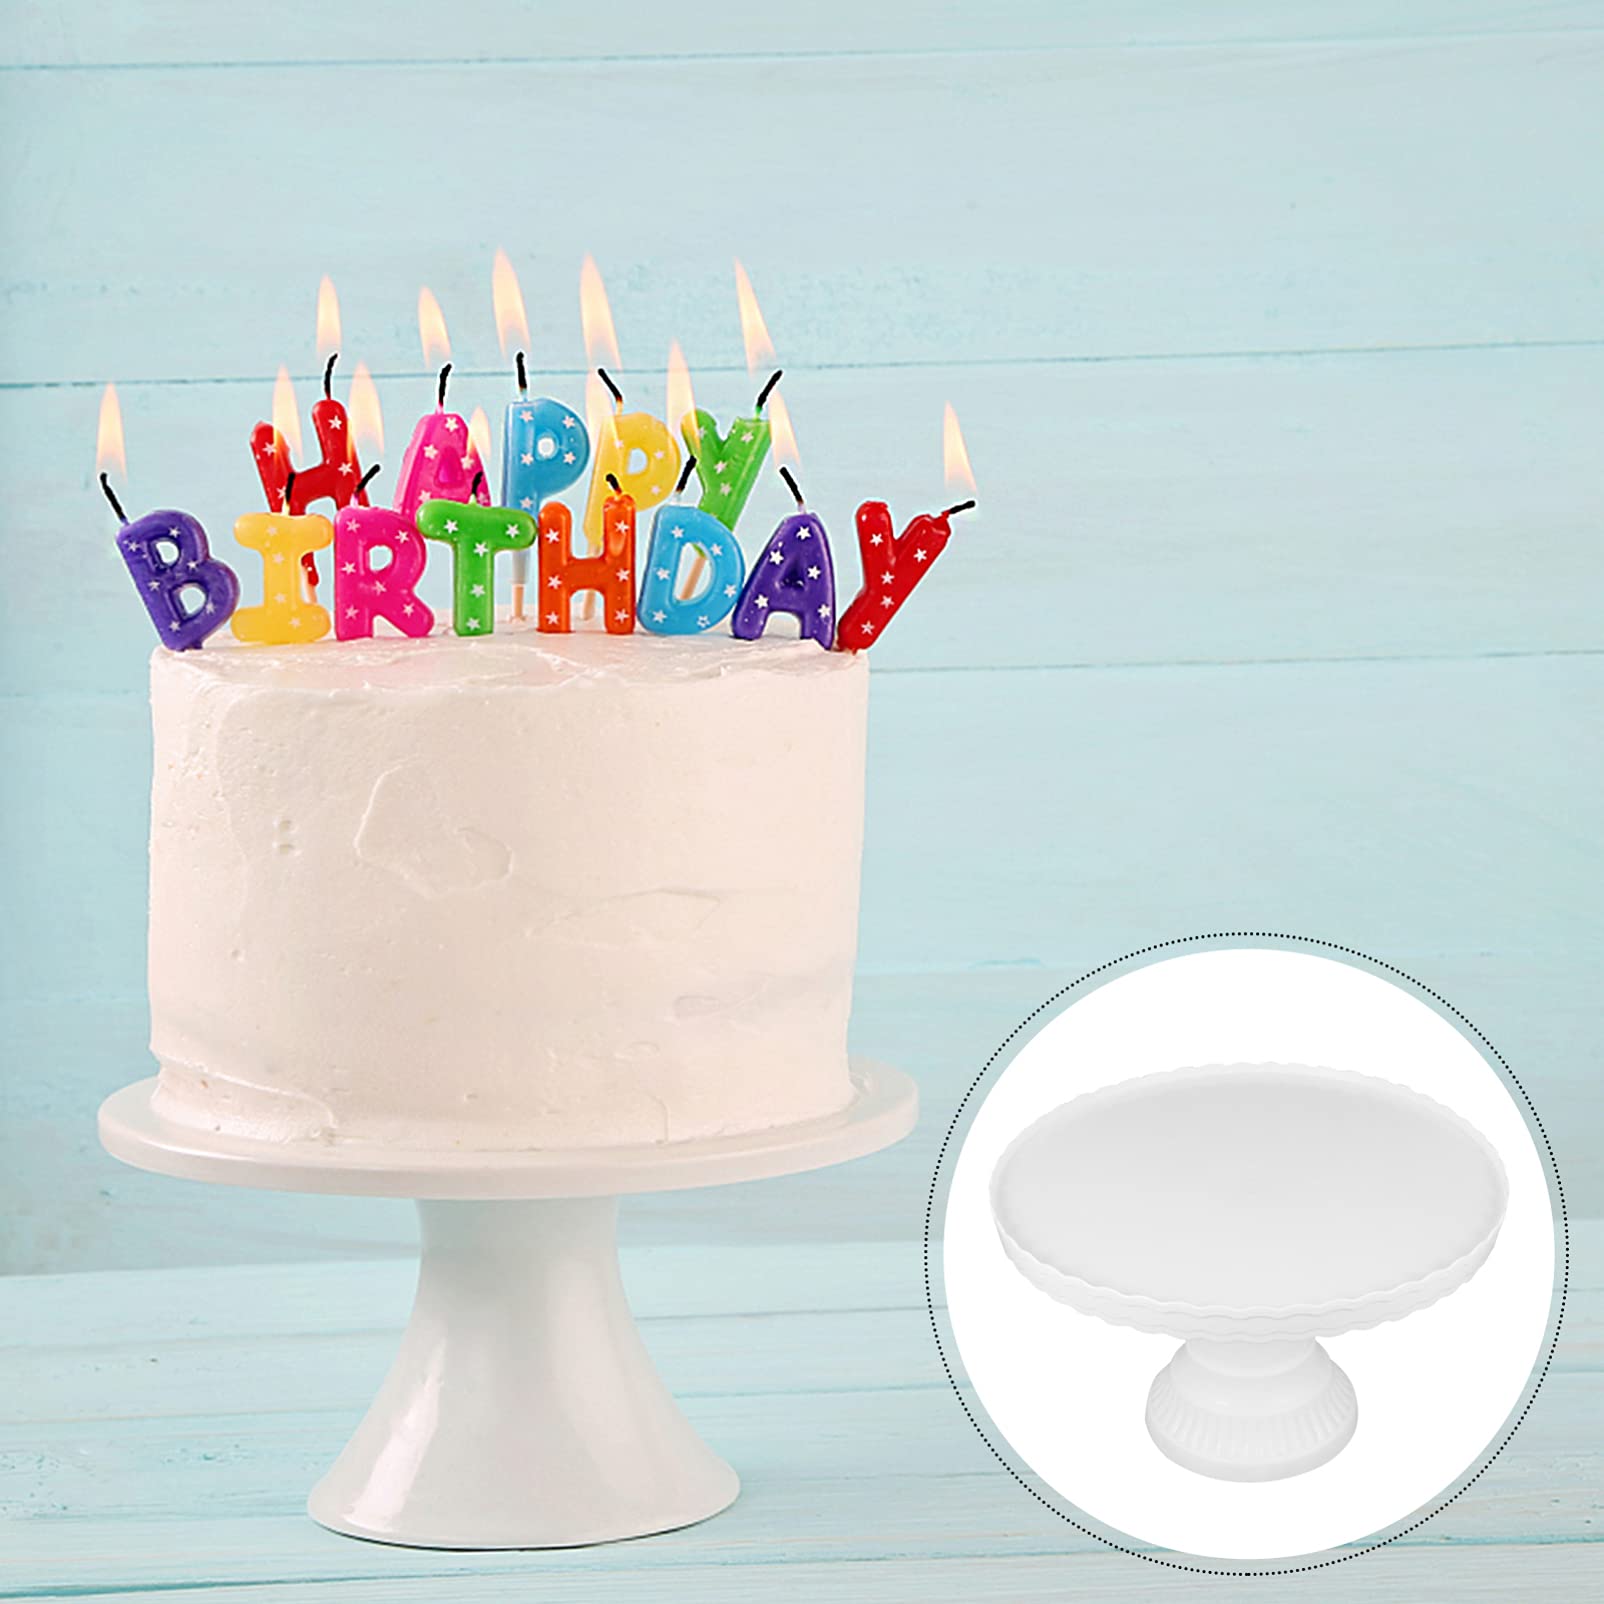 32.5cm Cake Stand White Cake Stand Birthday Cake Server Plate Round Cake Holder for Cupcakes Pastries Macarons Biscuits Wedding Party Decor